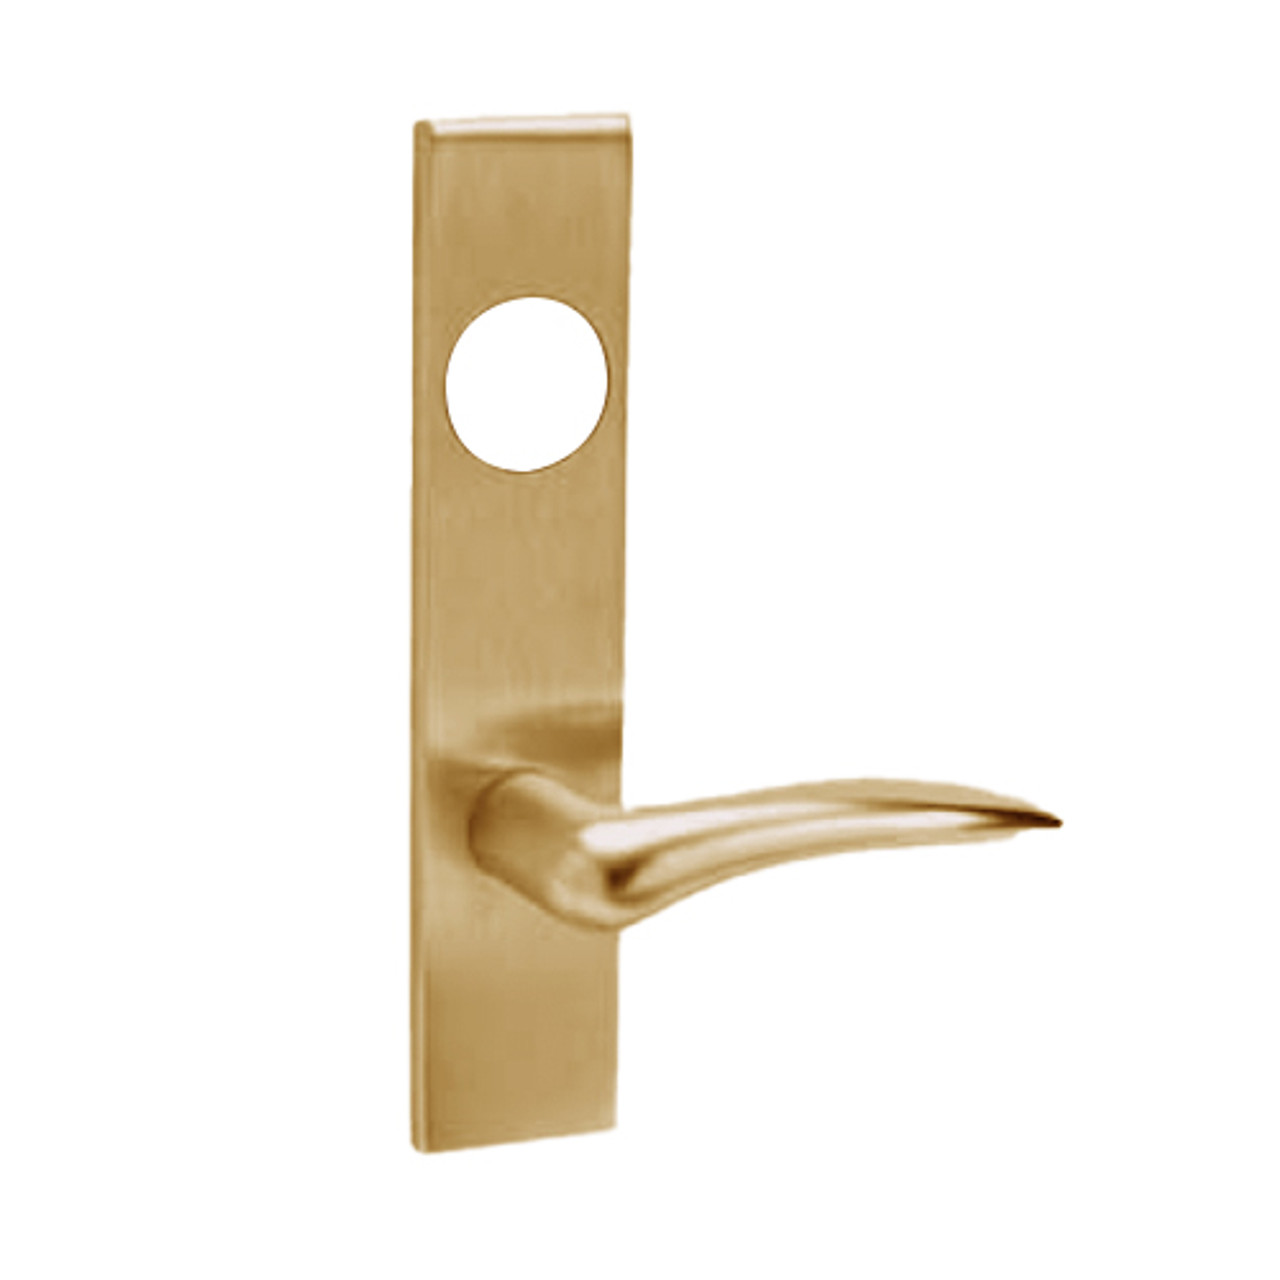 ML2055-DSR-612-CL6-LH Corbin Russwin ML2000 Series IC 6-Pin Less Core Mortise Classroom Locksets with Dirke Lever in Satin Bronze